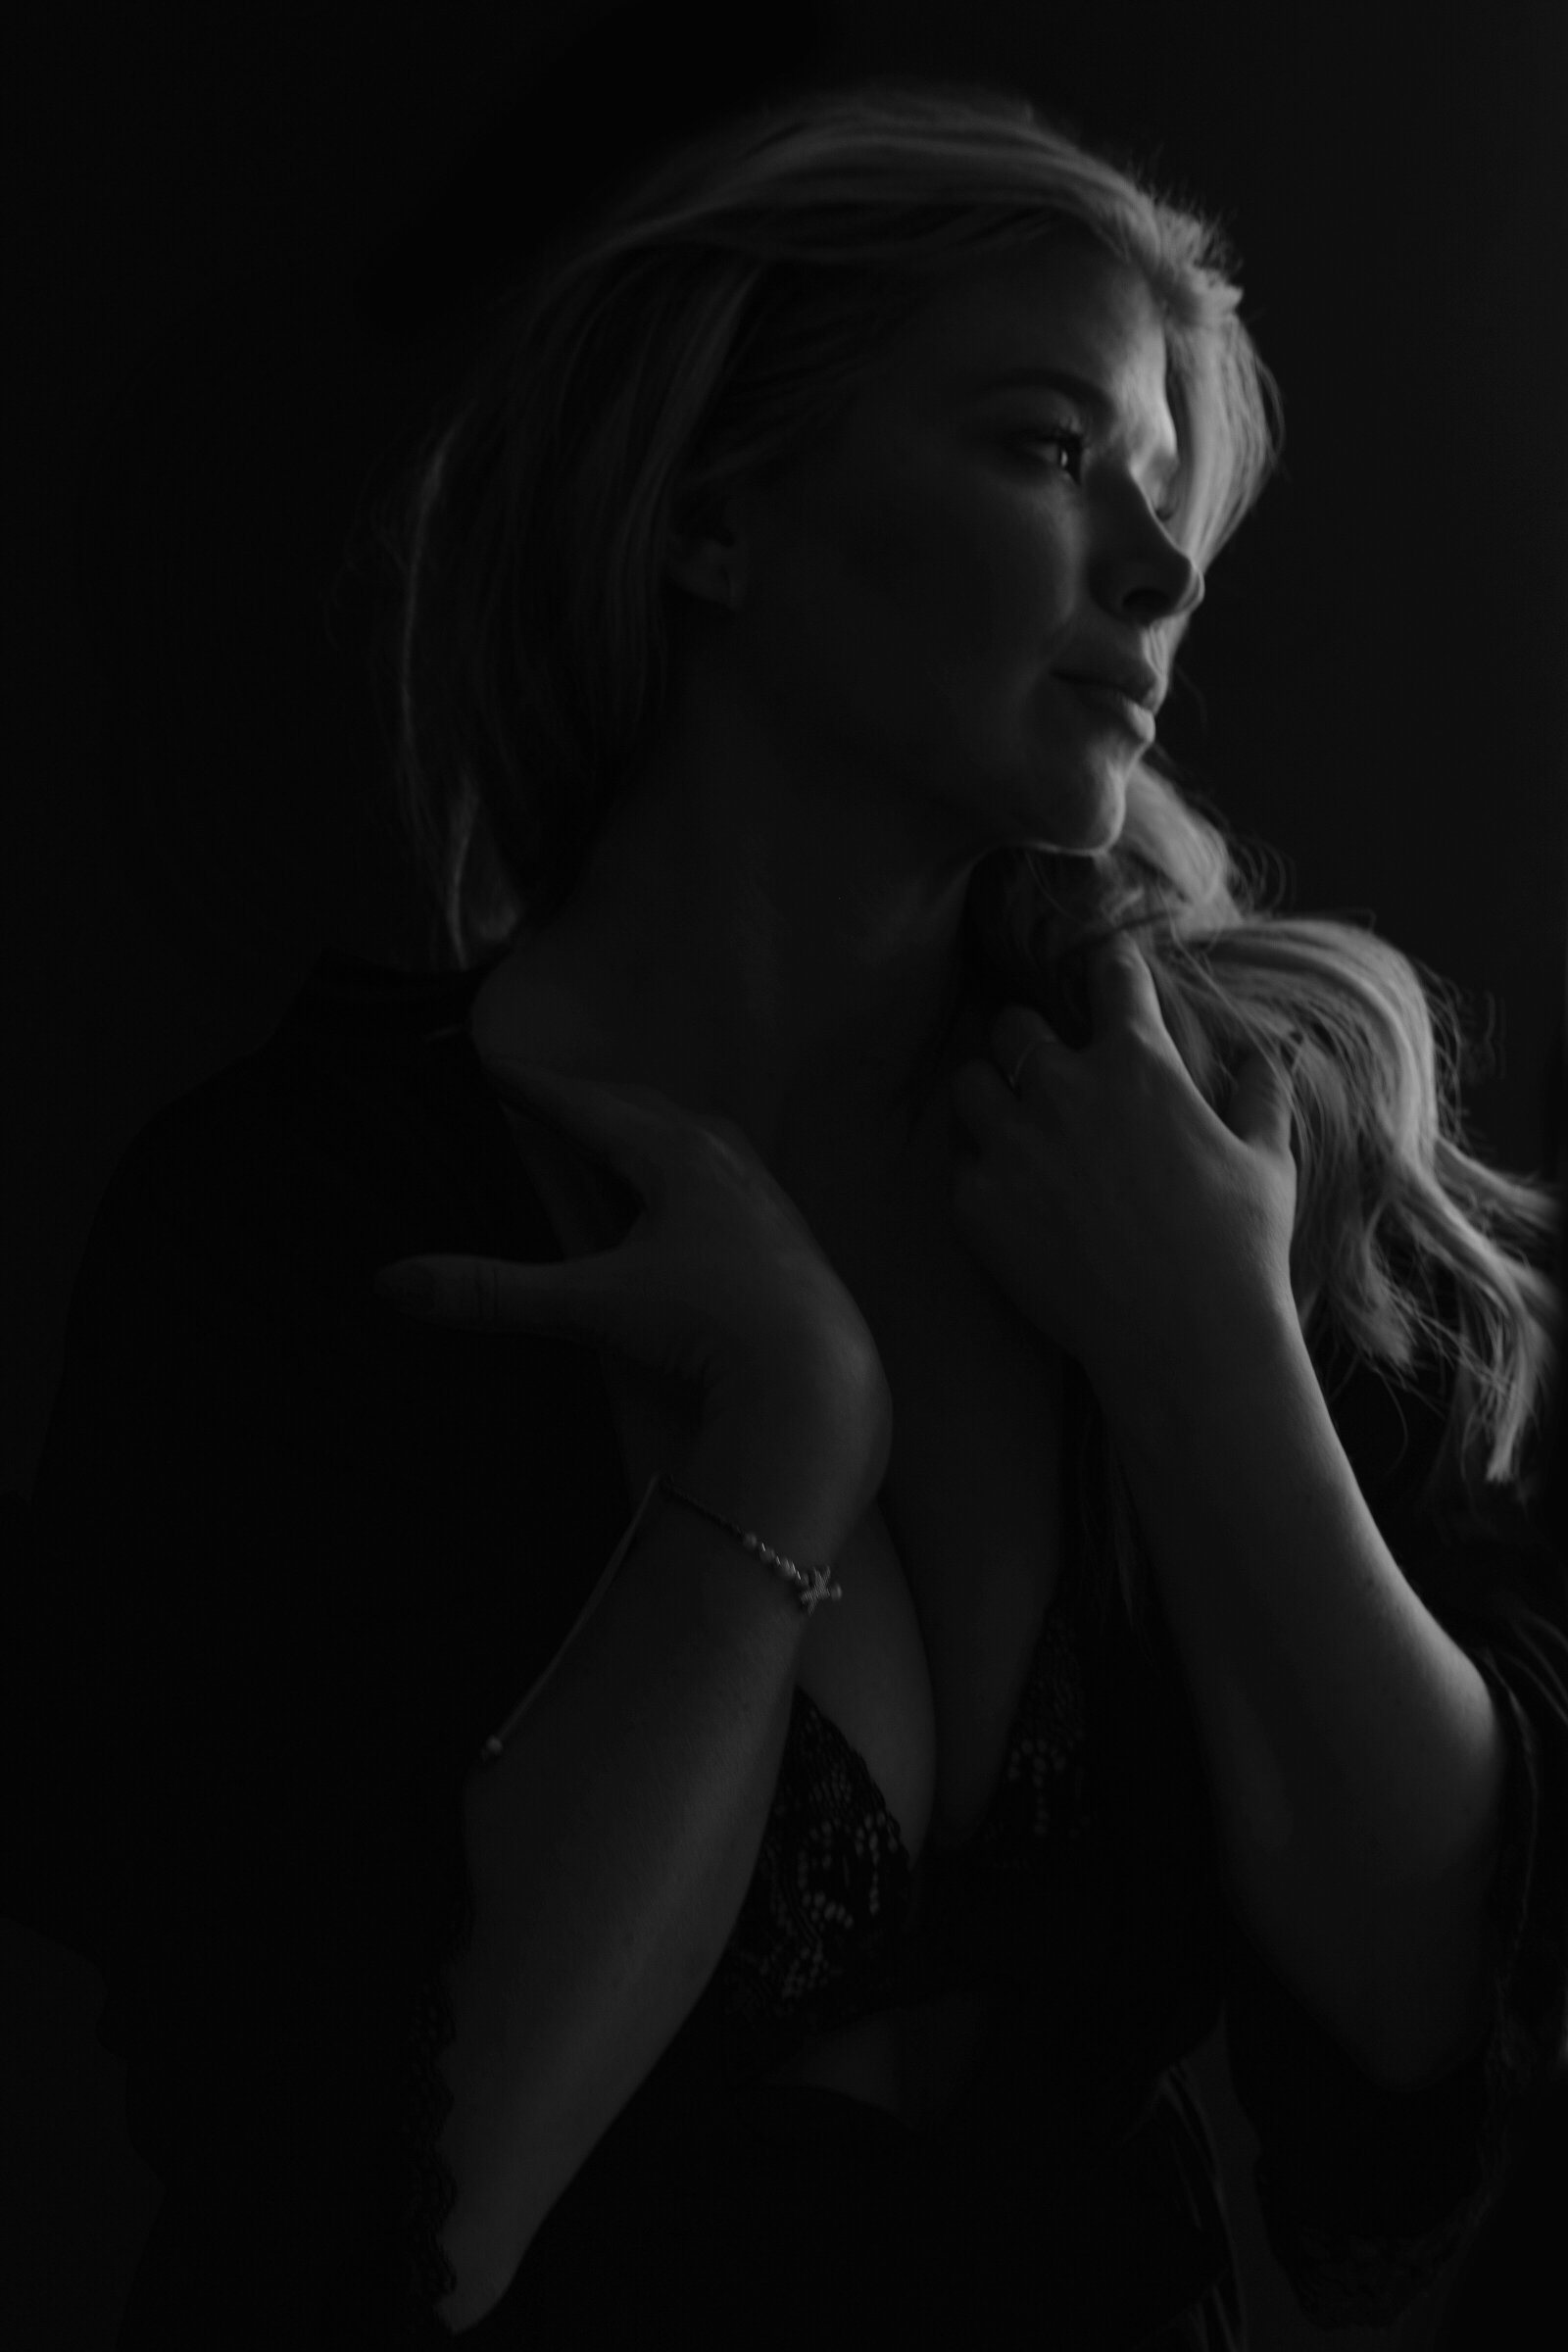 San Diego Boudoir Photographer - black and white inclusive photography